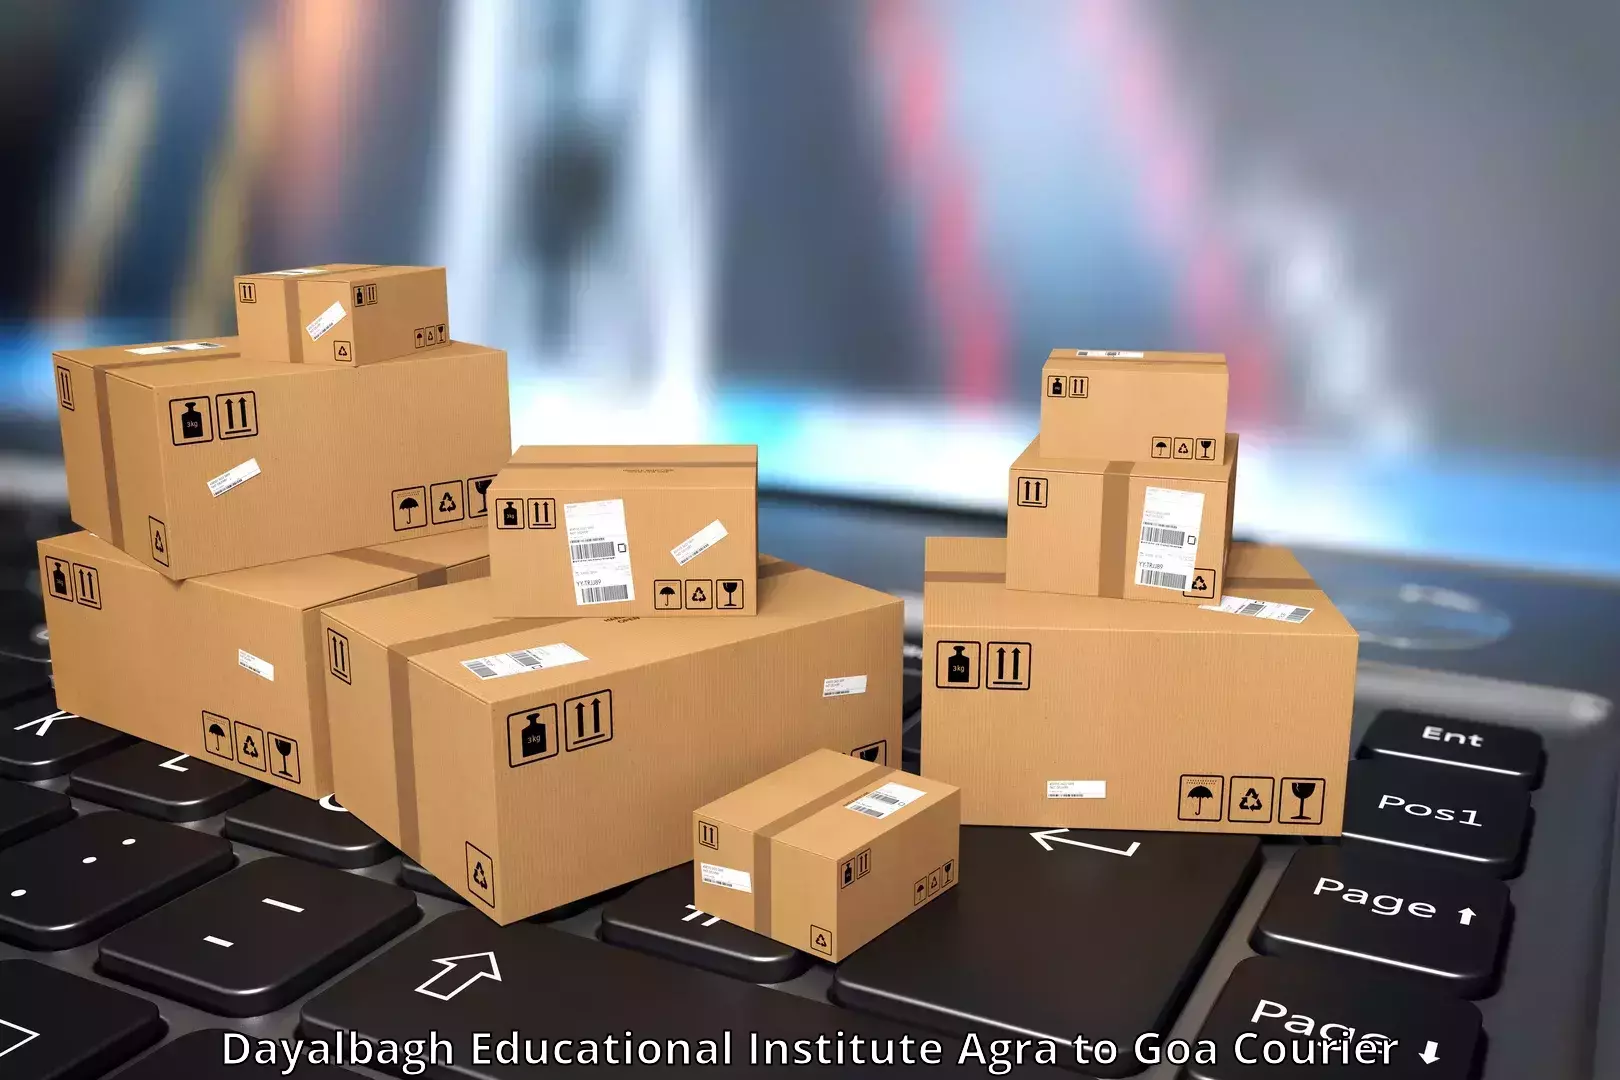 Affordable shipping solutions Dayalbagh Educational Institute Agra to Goa